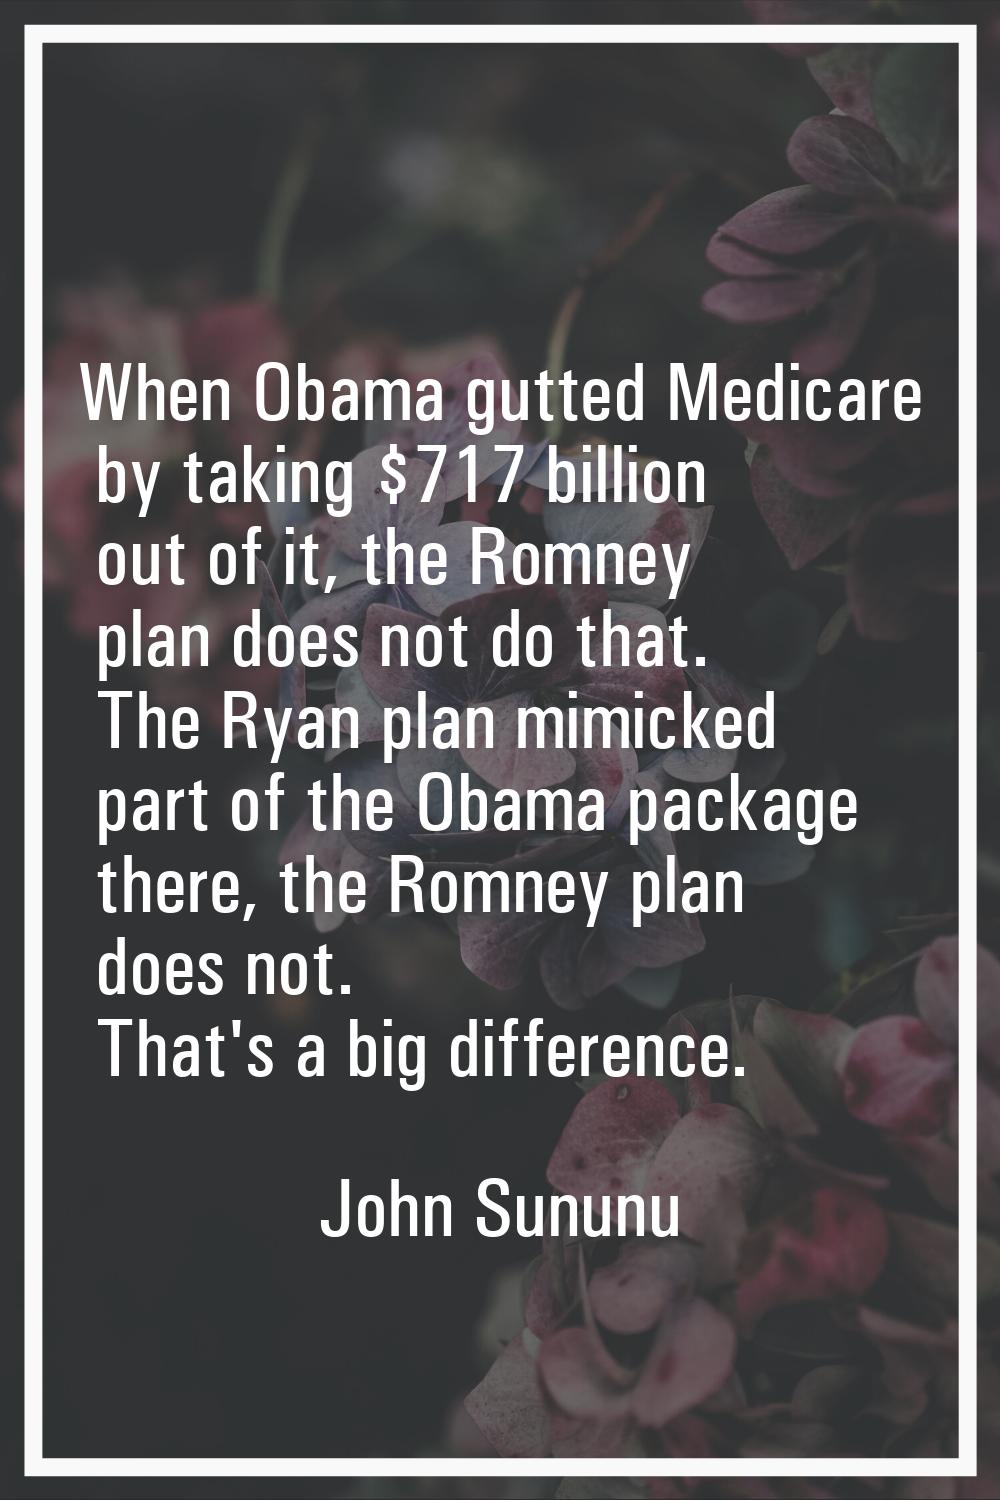 When Obama gutted Medicare by taking $717 billion out of it, the Romney plan does not do that. The 